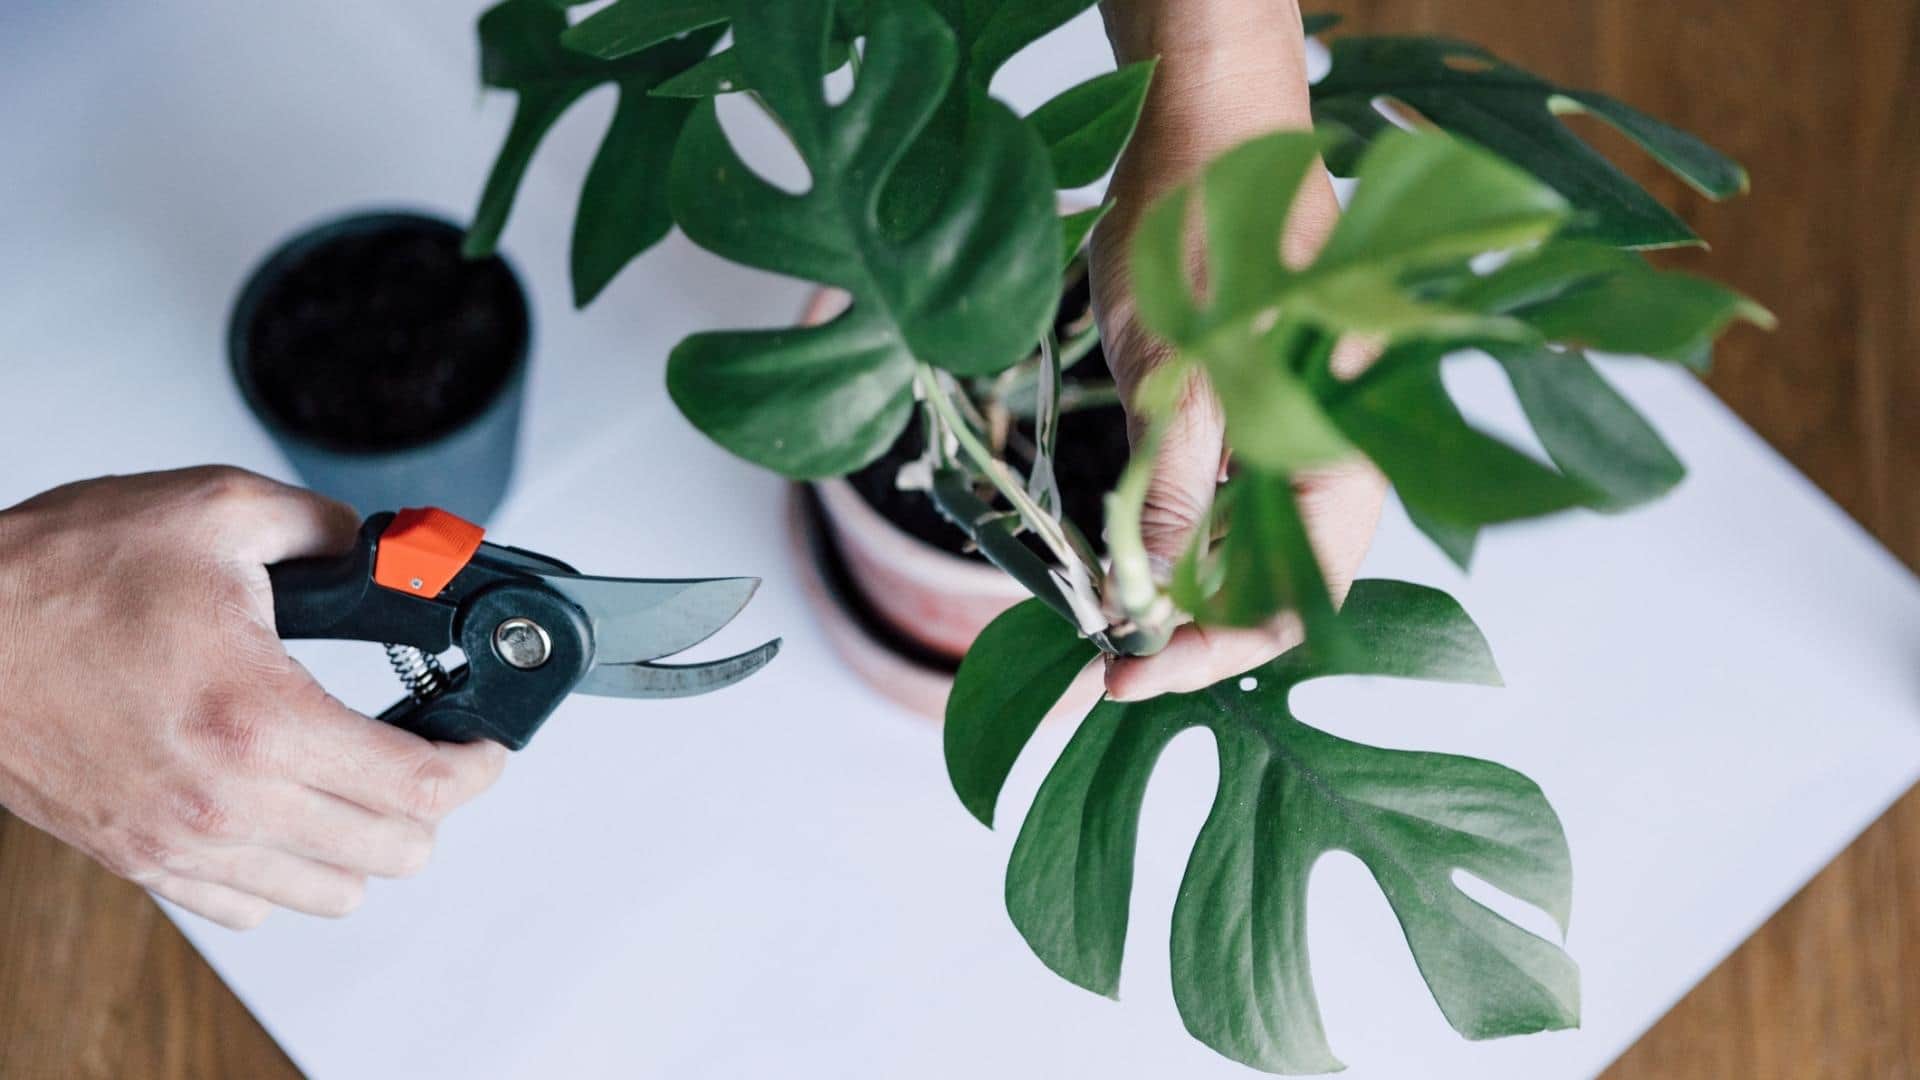 A birds-eye view shows a person’s hand holding a potted monstera plant, while their other hand holds a pair of black and orange secateurs.